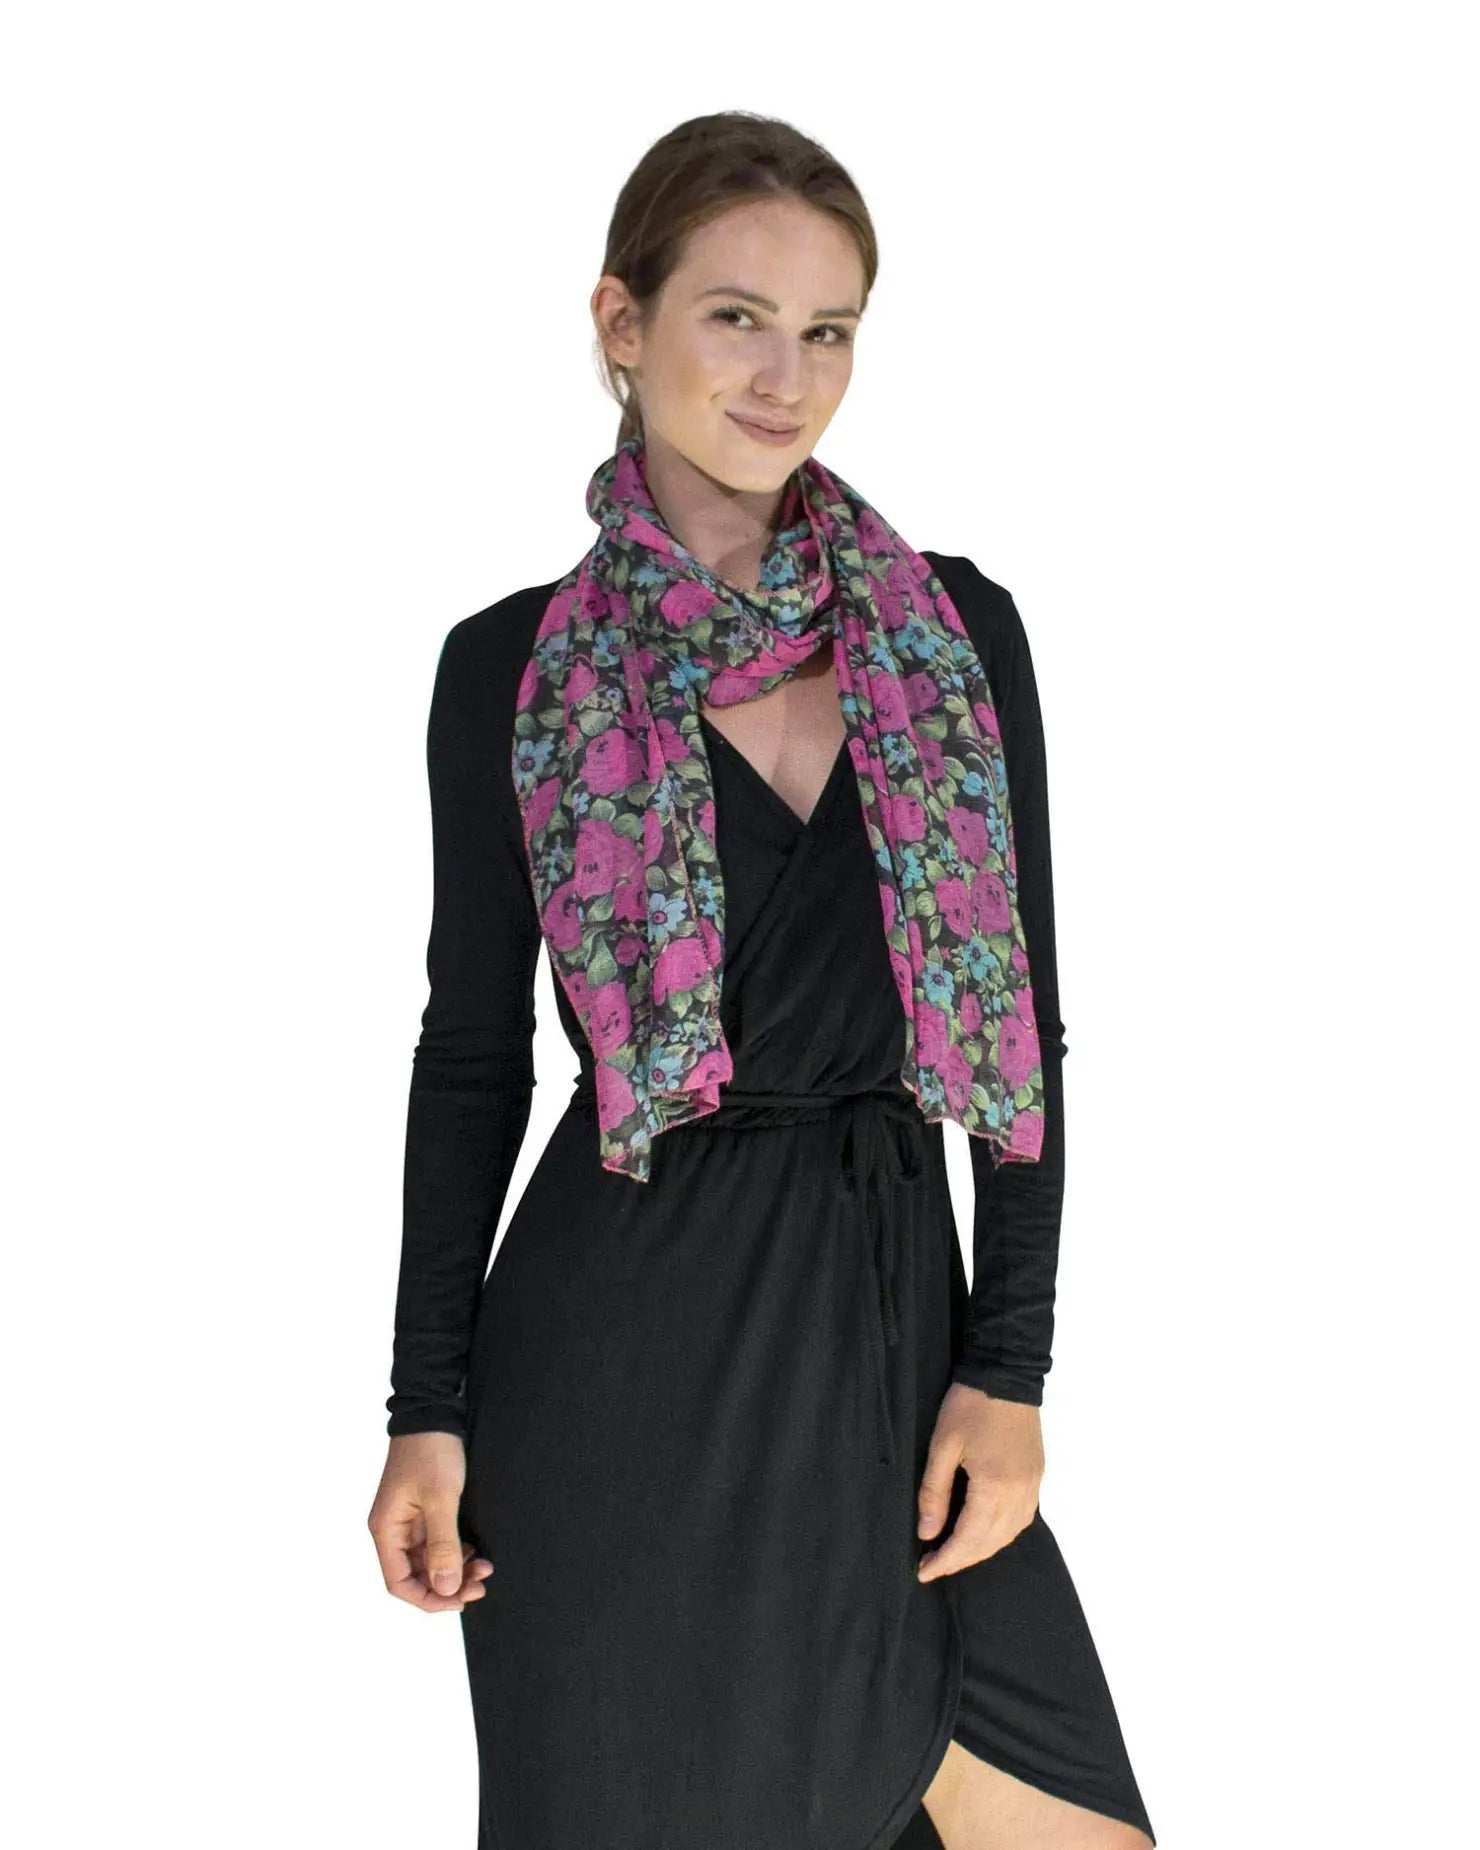 Woman wearing black dress and pink scarf from Rose & Ditsy Floral Print Soft Lightweight Scarf